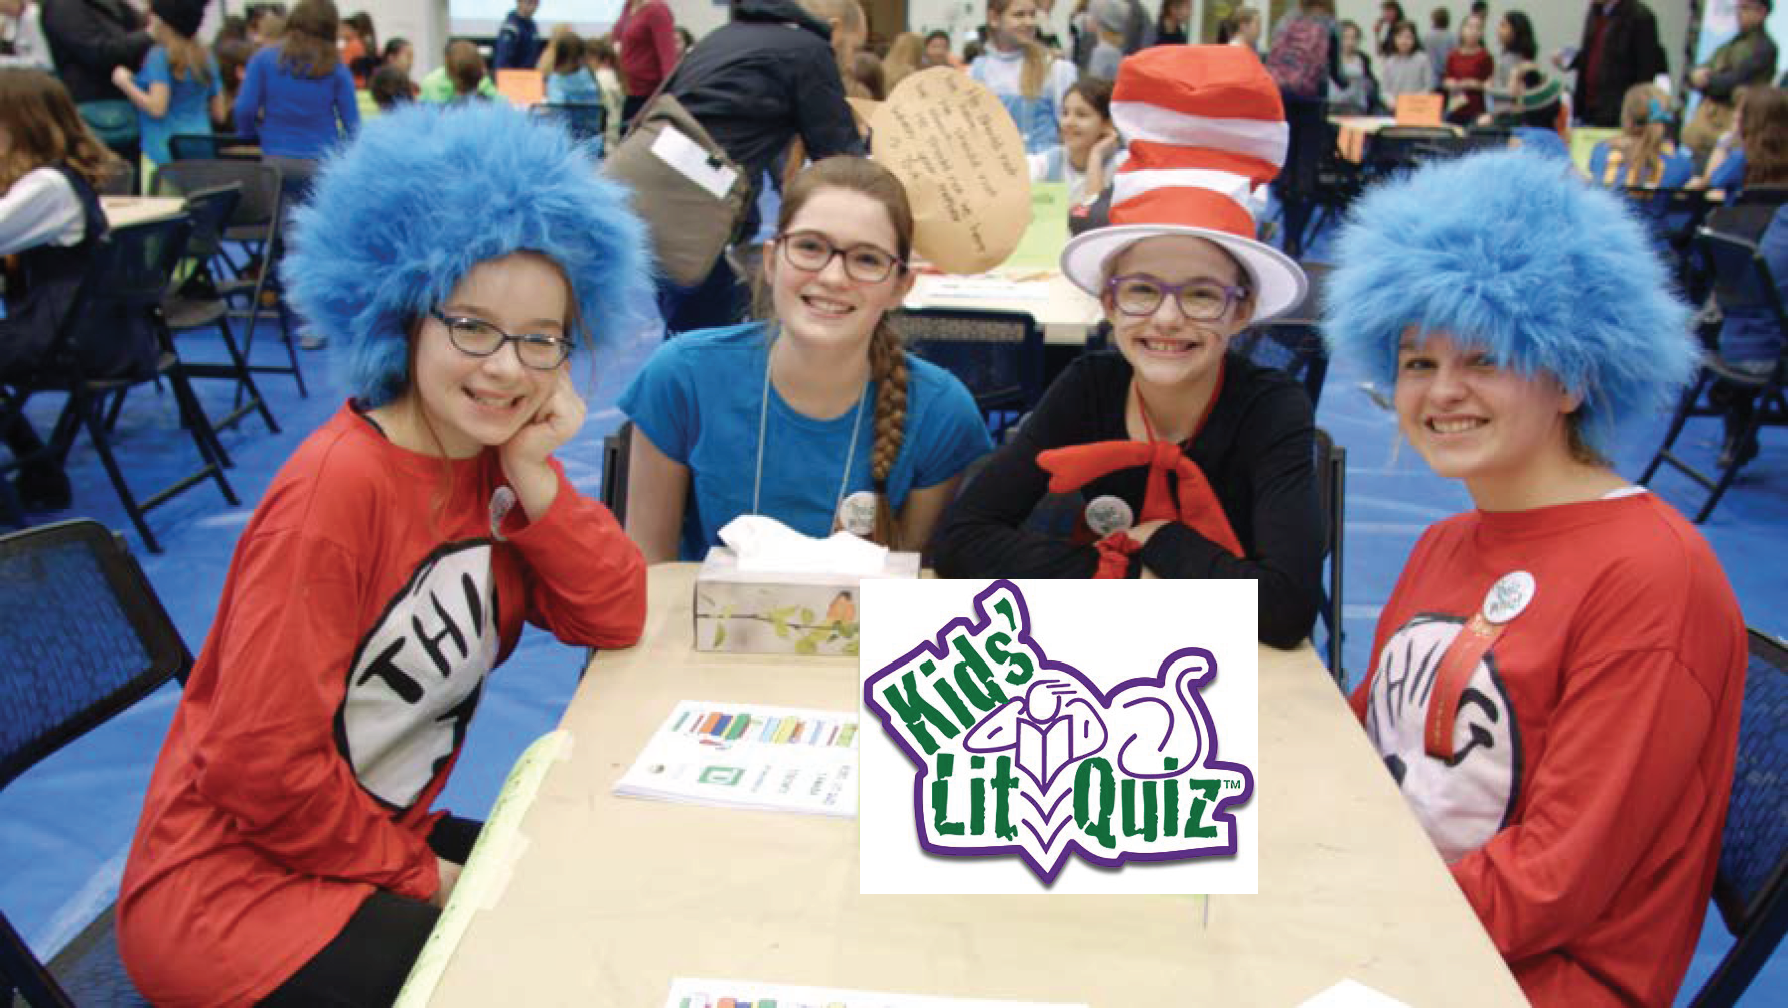 Students dressed as characters from the Cat in the Hat